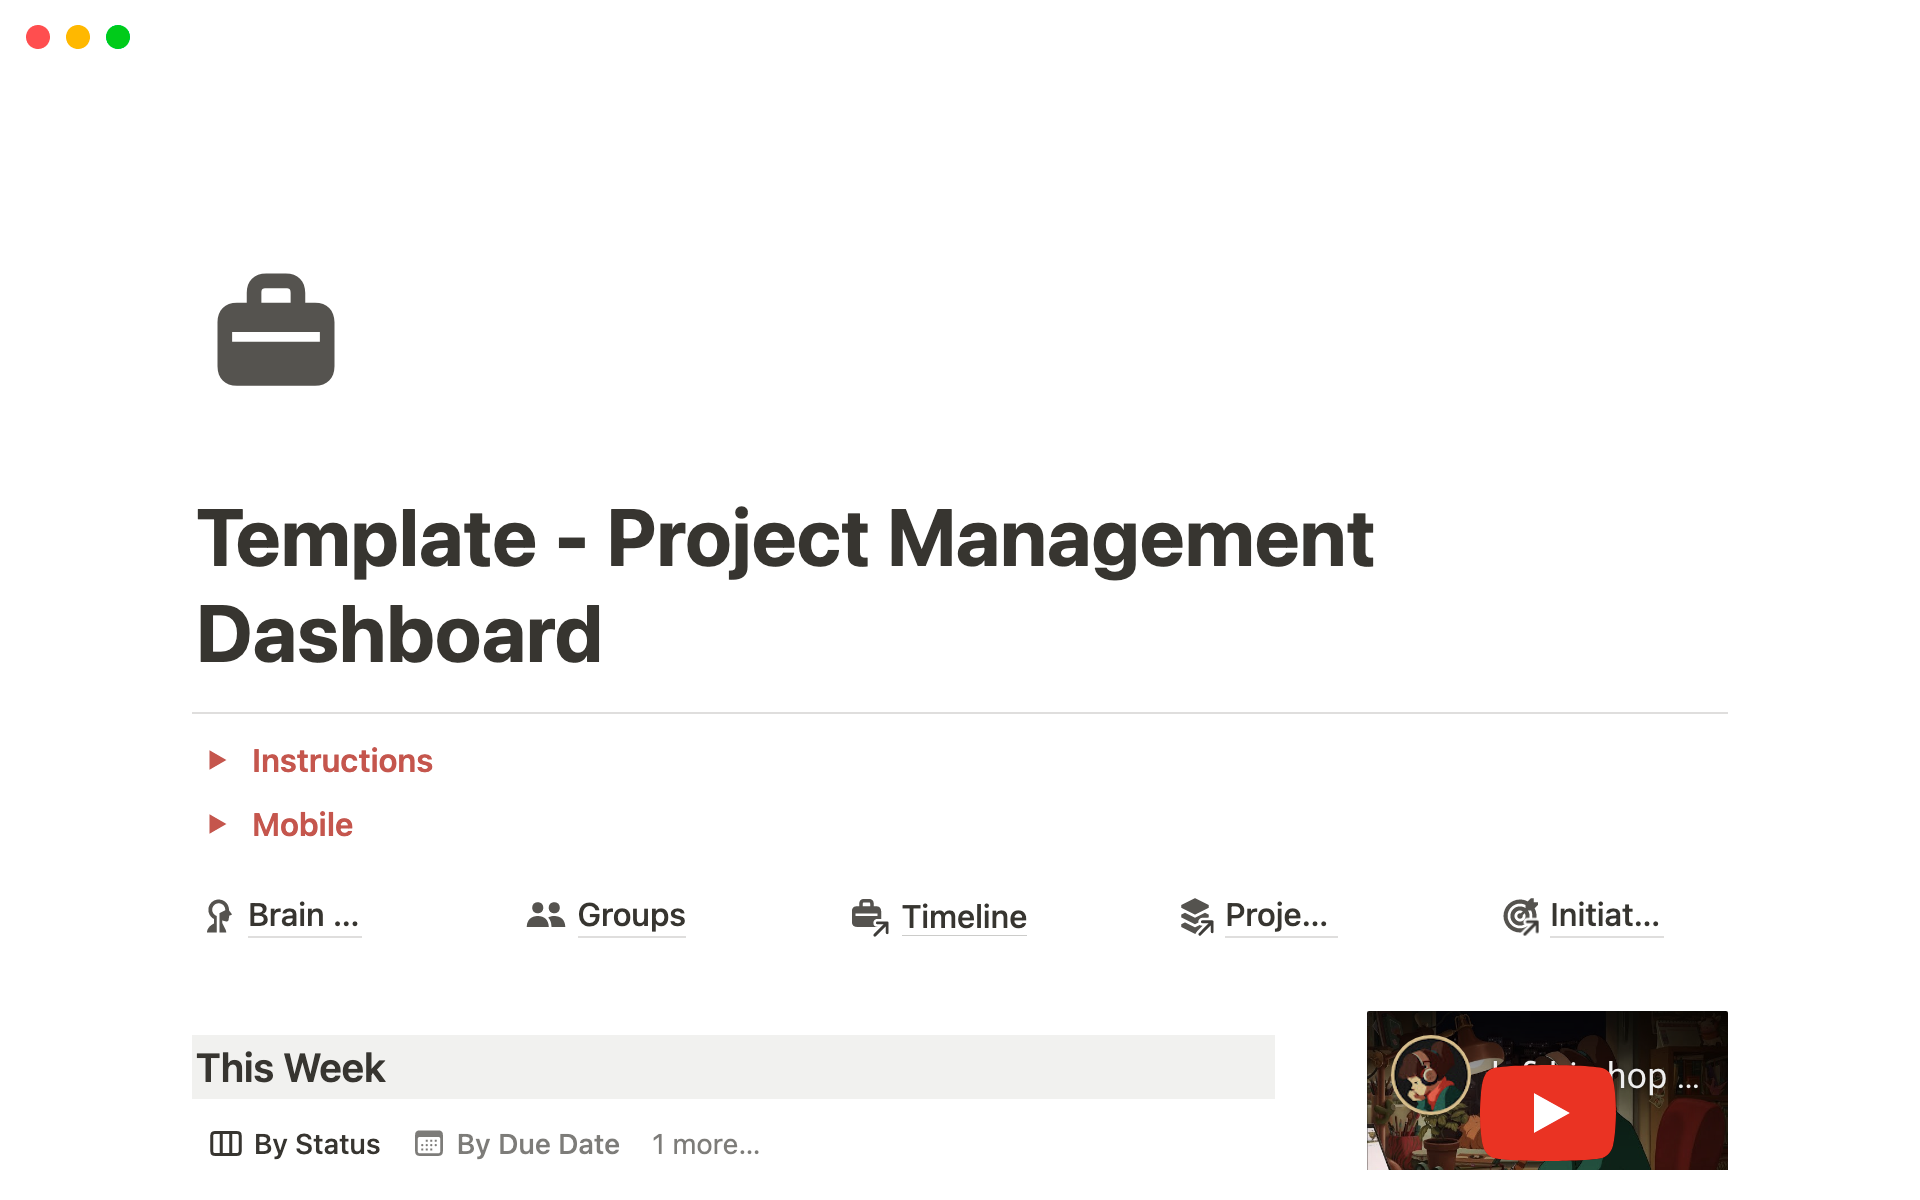 Track project tasks, meetings, and goals to increase productivity and work more efficiently.